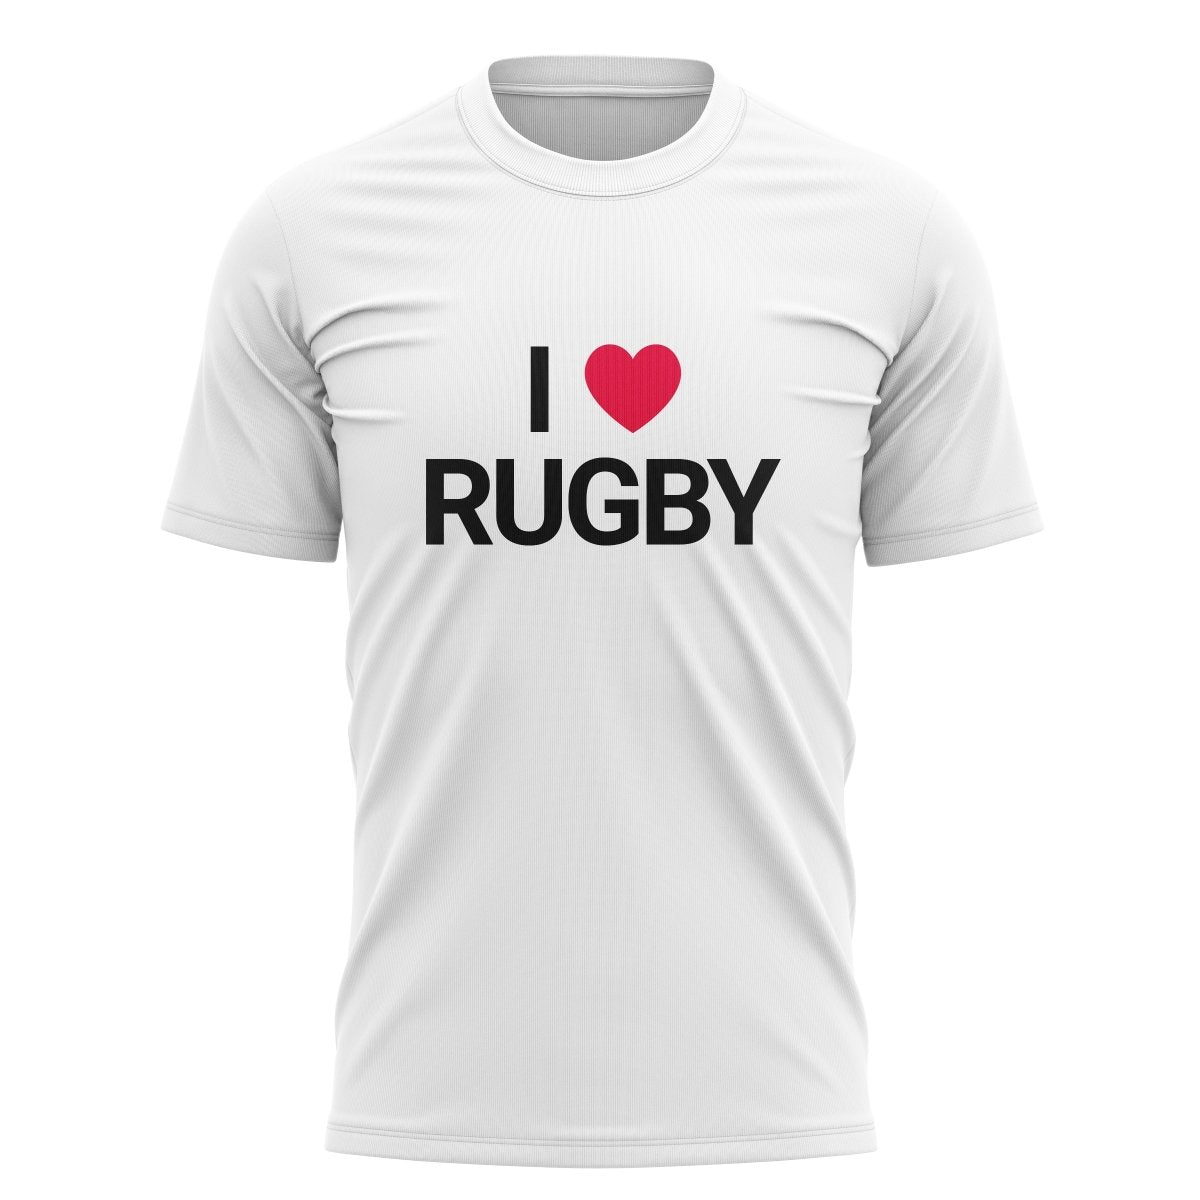 I Love Rugby Graphic Tee - www.therugbyshop.com www.therugbyshop.com MEN&#39;S / WHITE / S SANMAR TEES I Love Rugby Graphic Tee